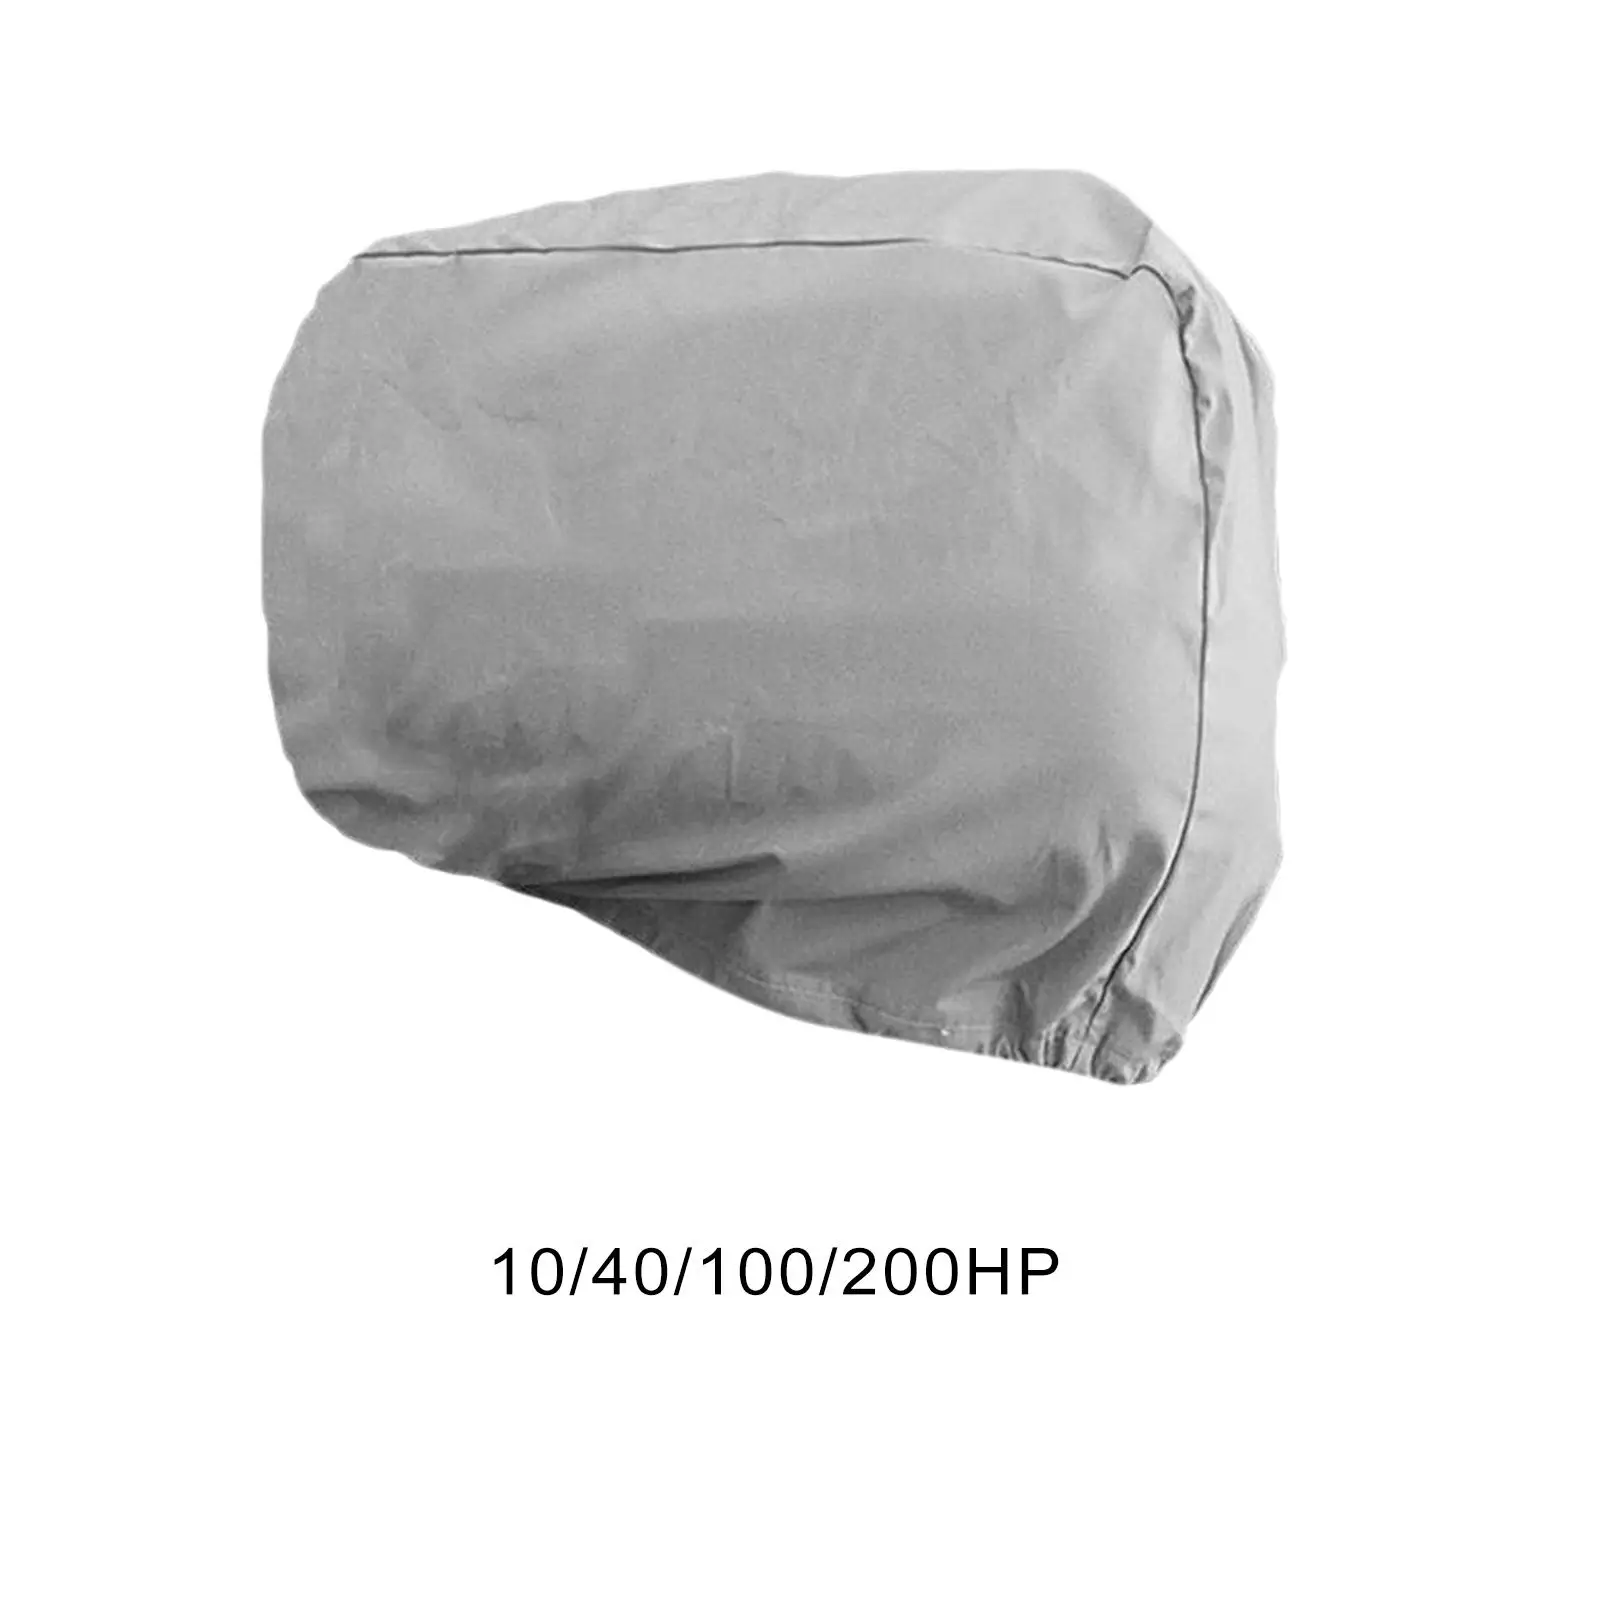 Outboard Motor Cover Heavy Duty Tear Resistant Boat Hood Covers for Fishing